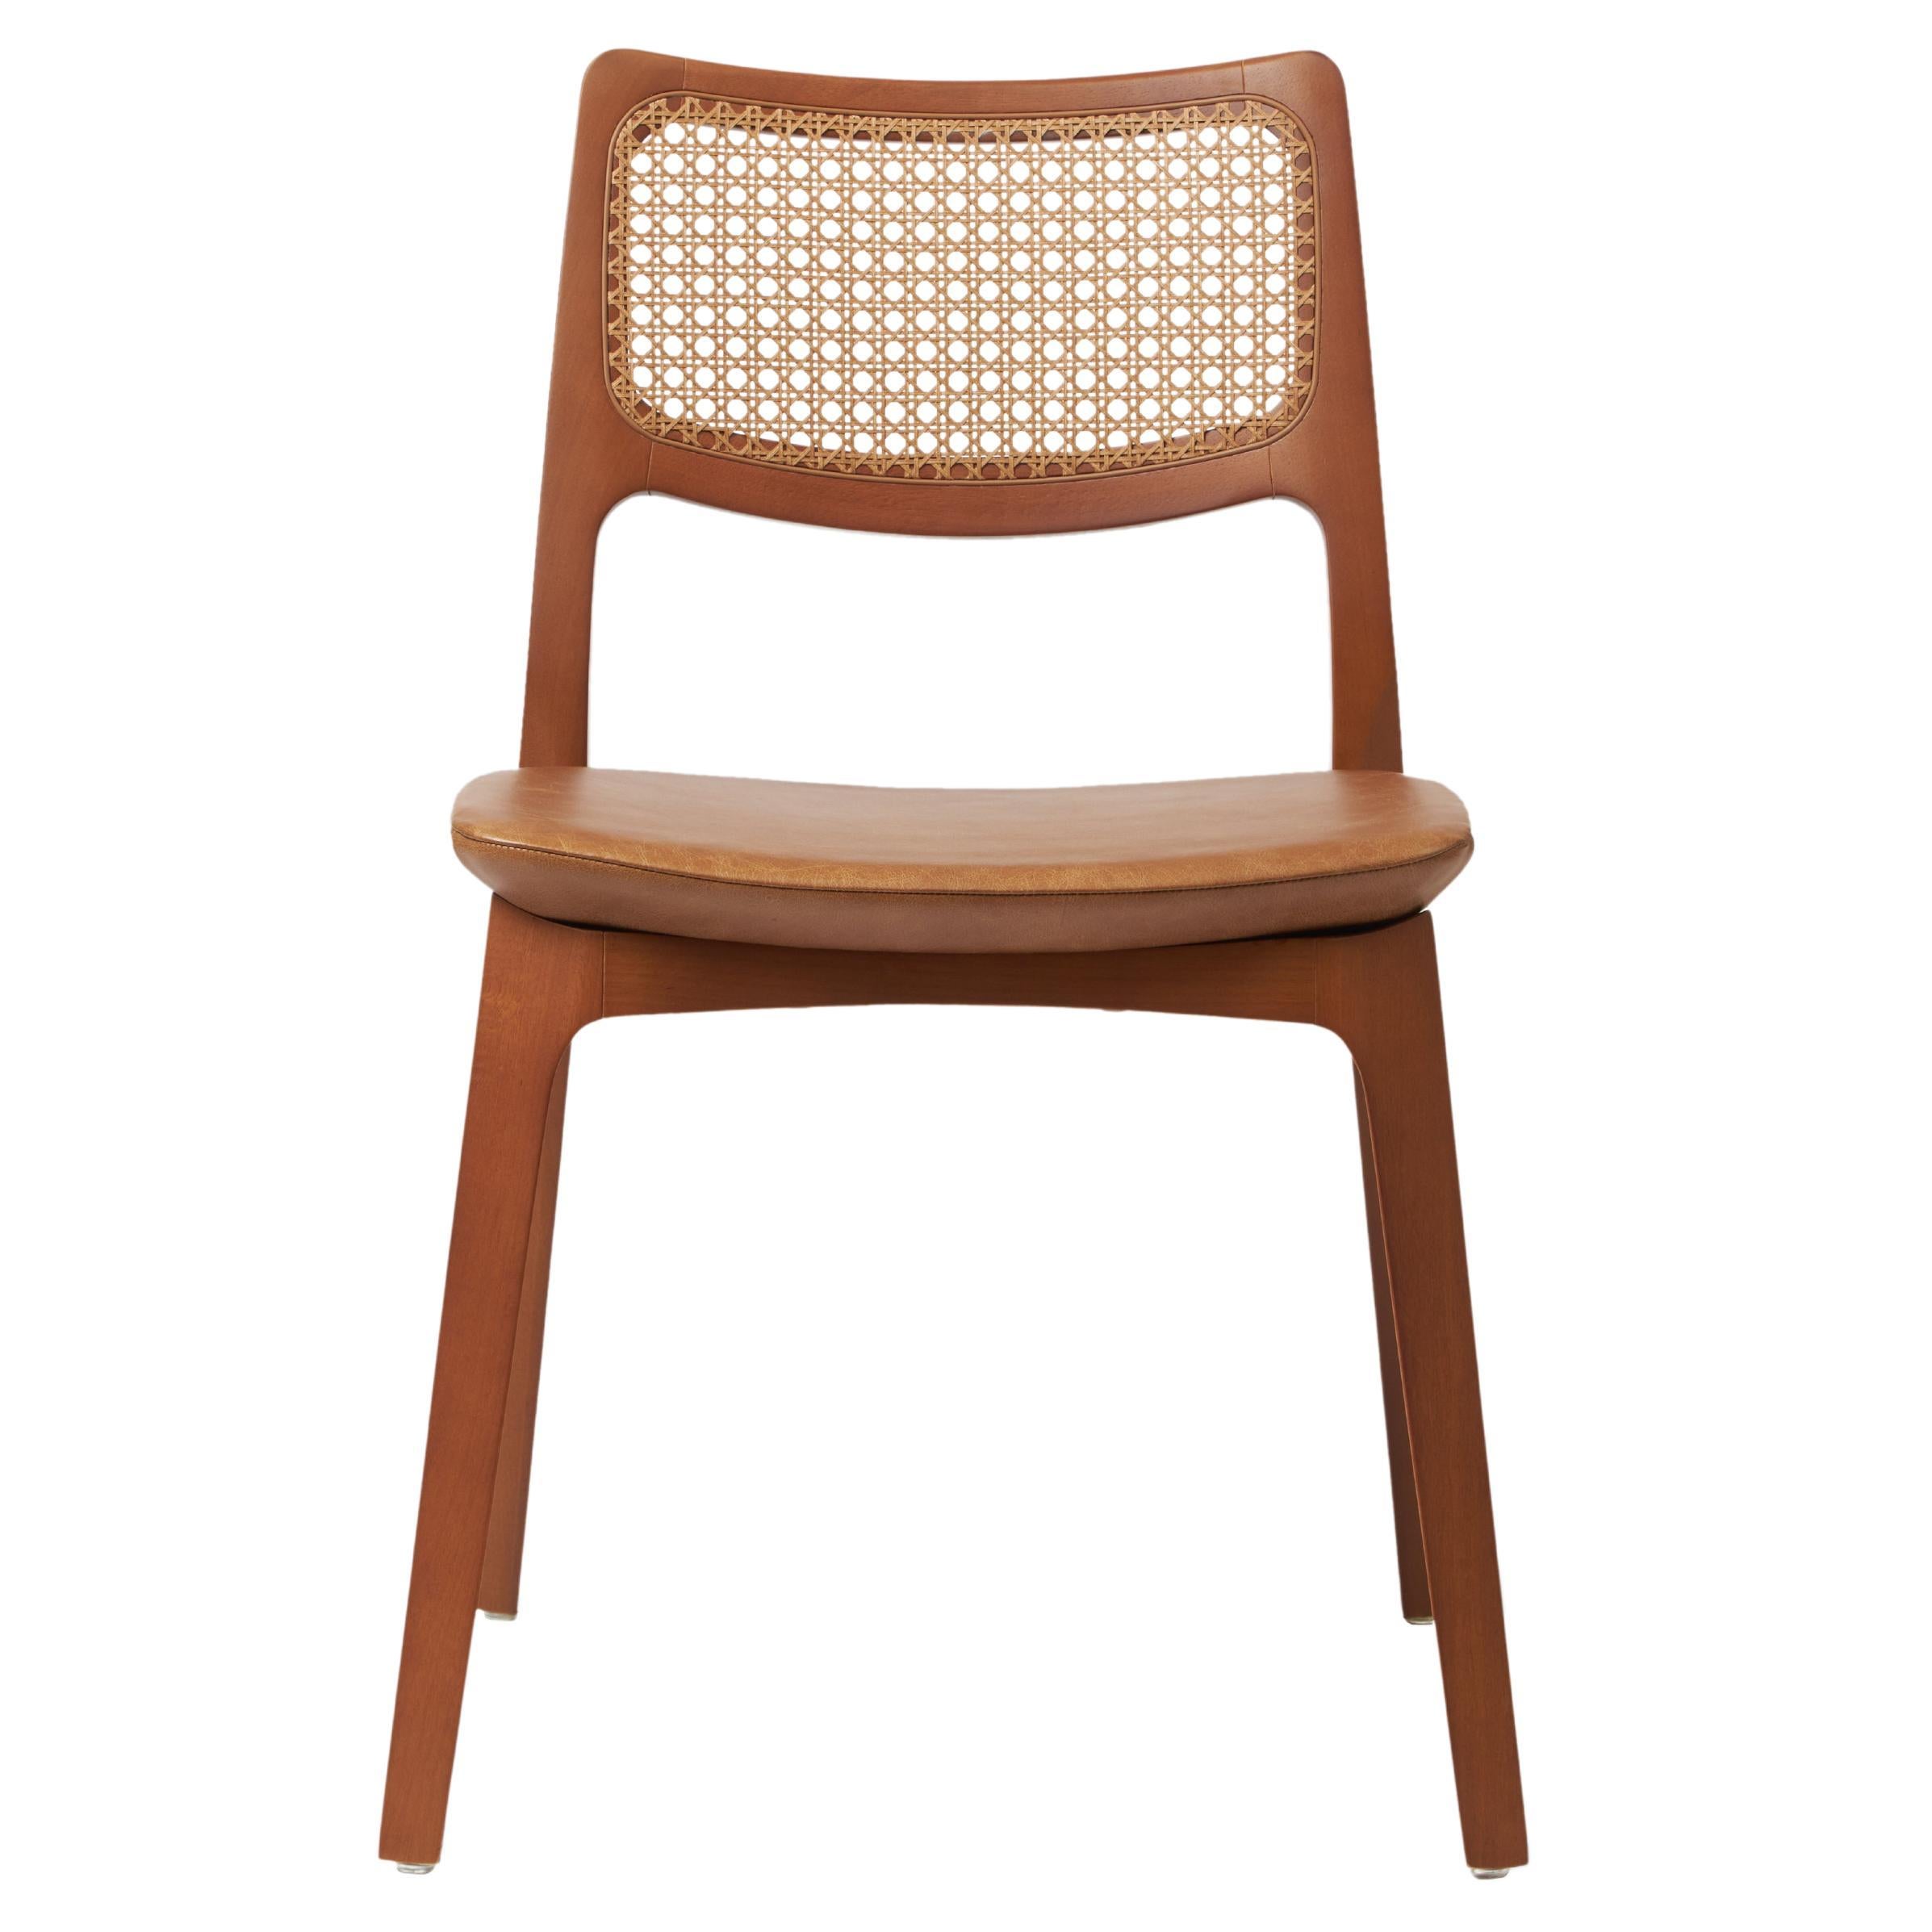 The Moderns Aurora Chair Sculptured in Walnut Finish No Arms, leather seating